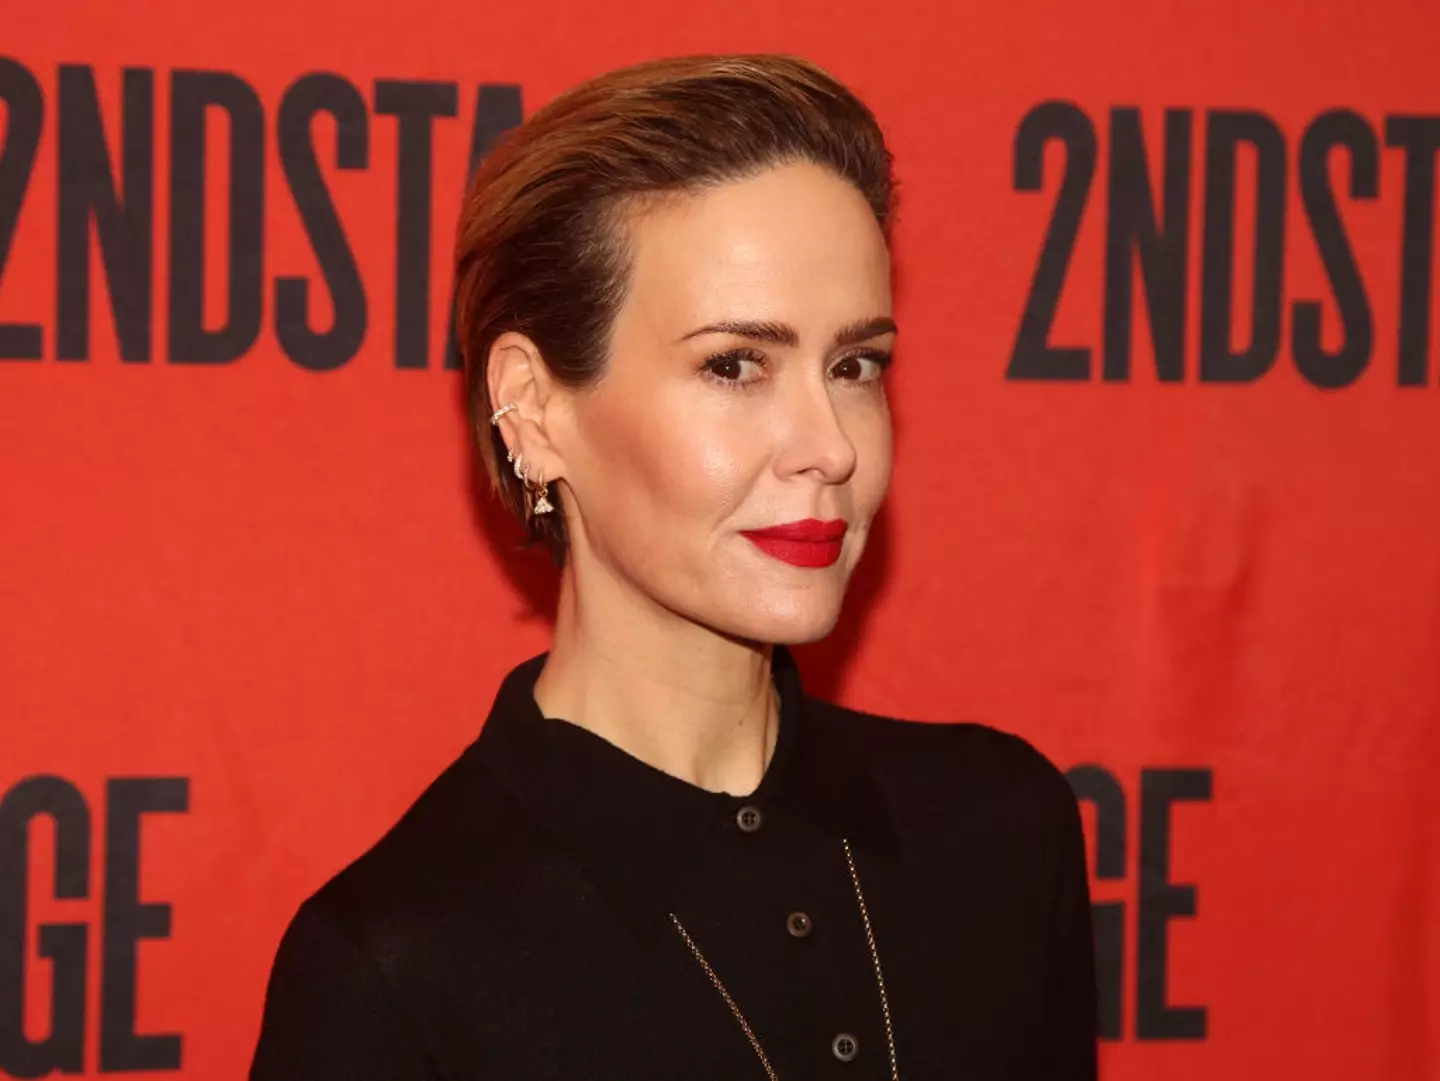 A Sarah Paulson show on Netflix has been cancelled after just one season.